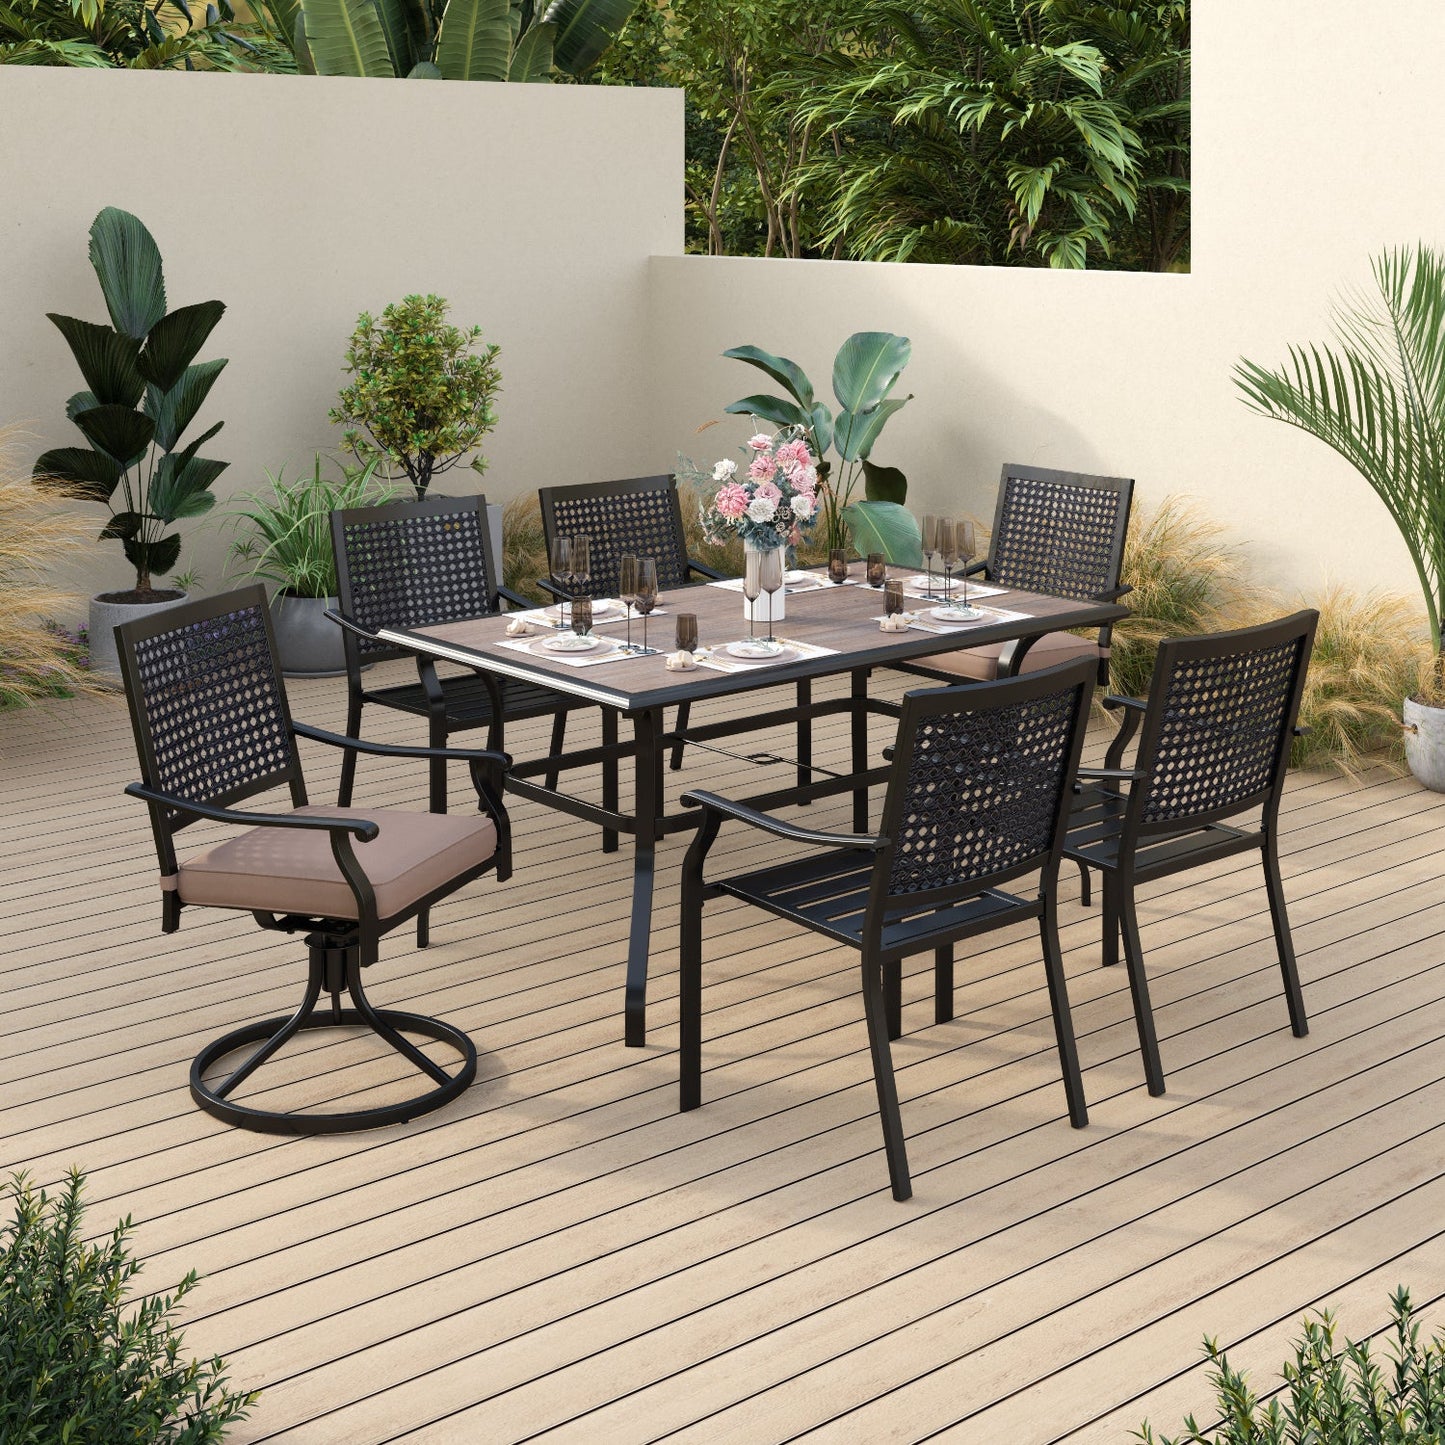 Sophia & William 7 Pieces Metal Patio Dining Set Outdoor Teak Grain Table and Chairs Furniture Set